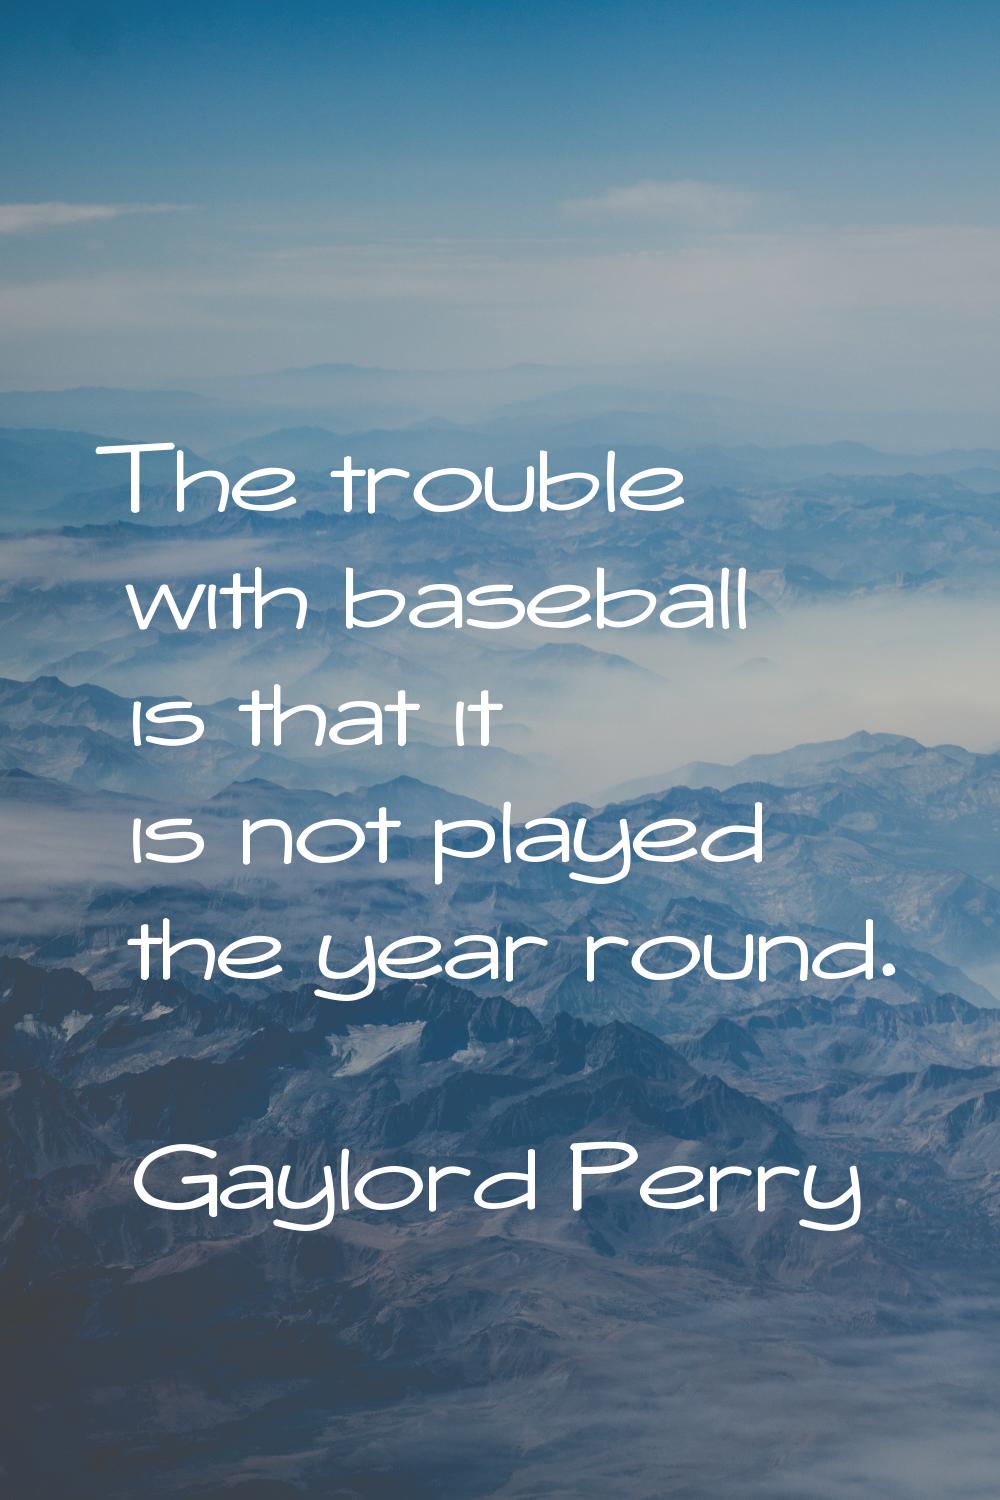 The trouble with baseball is that it is not played the year round.